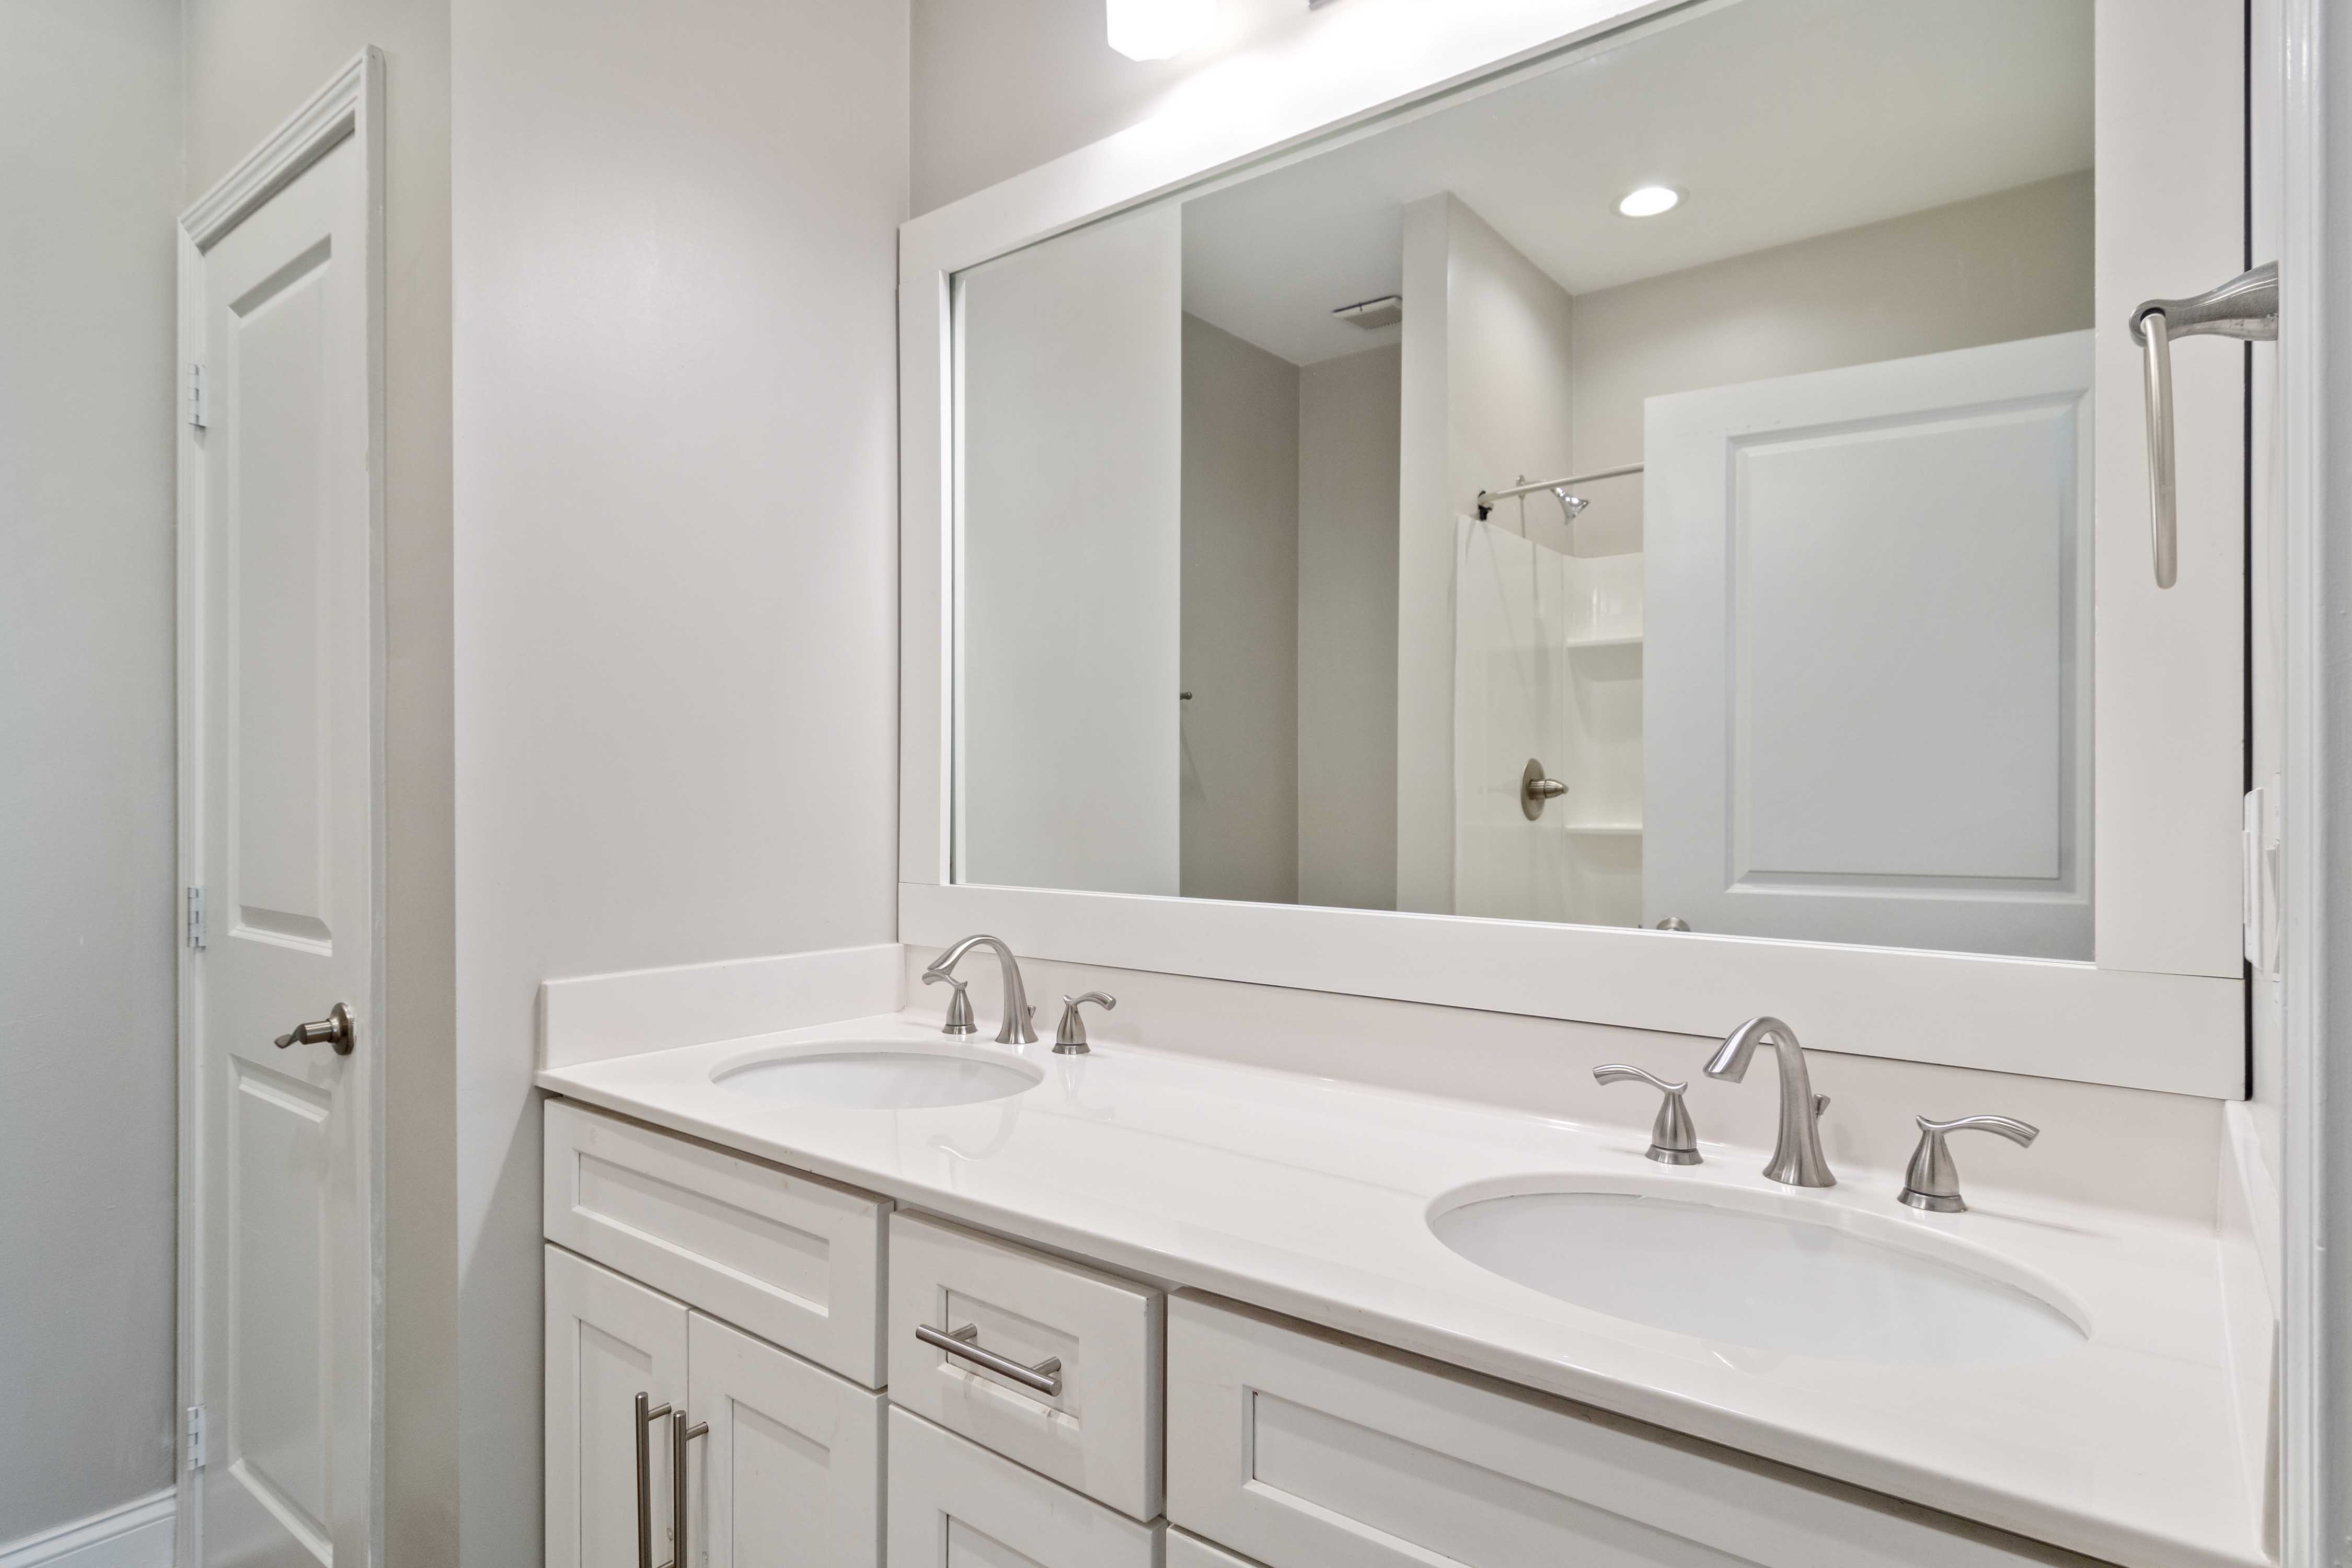 An apartment bathroom with two sinks at Mirador at Peachtree in Atlanta, Georgia